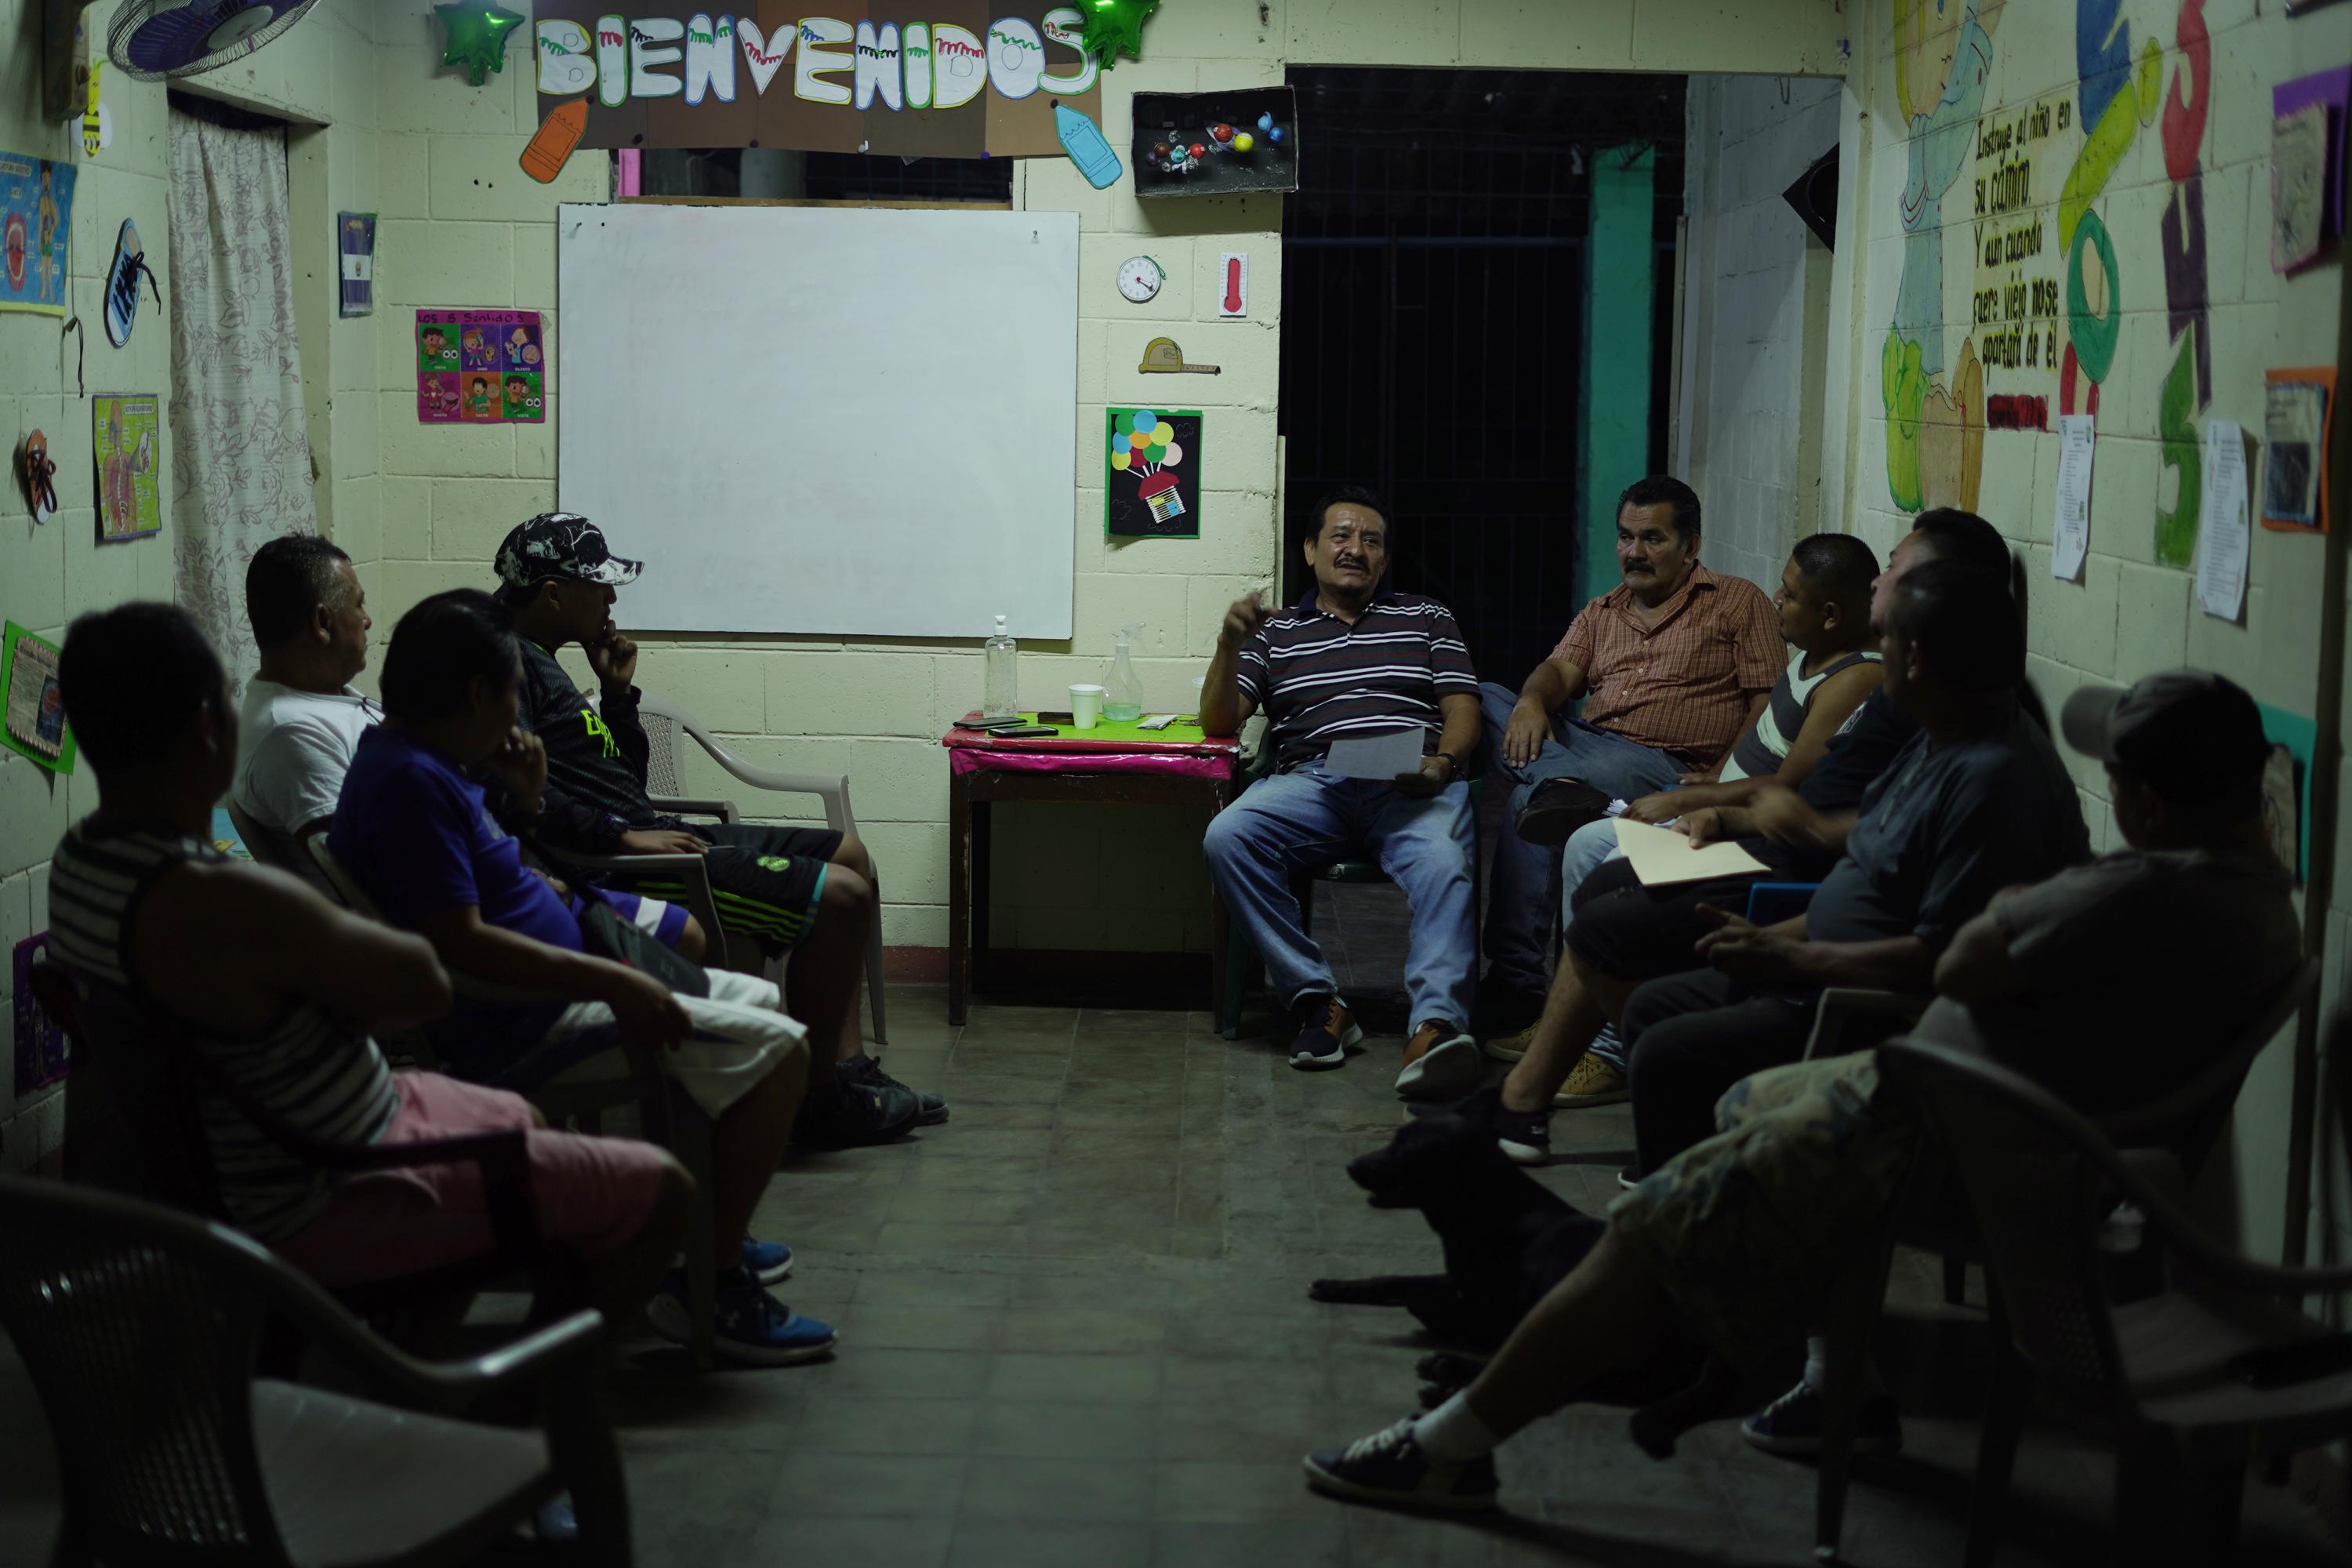 Residents of Reparto Las Cañas discuss plans for a soccer tournament to bring their divided community back together. Photo: Víctor Peña/El Faro